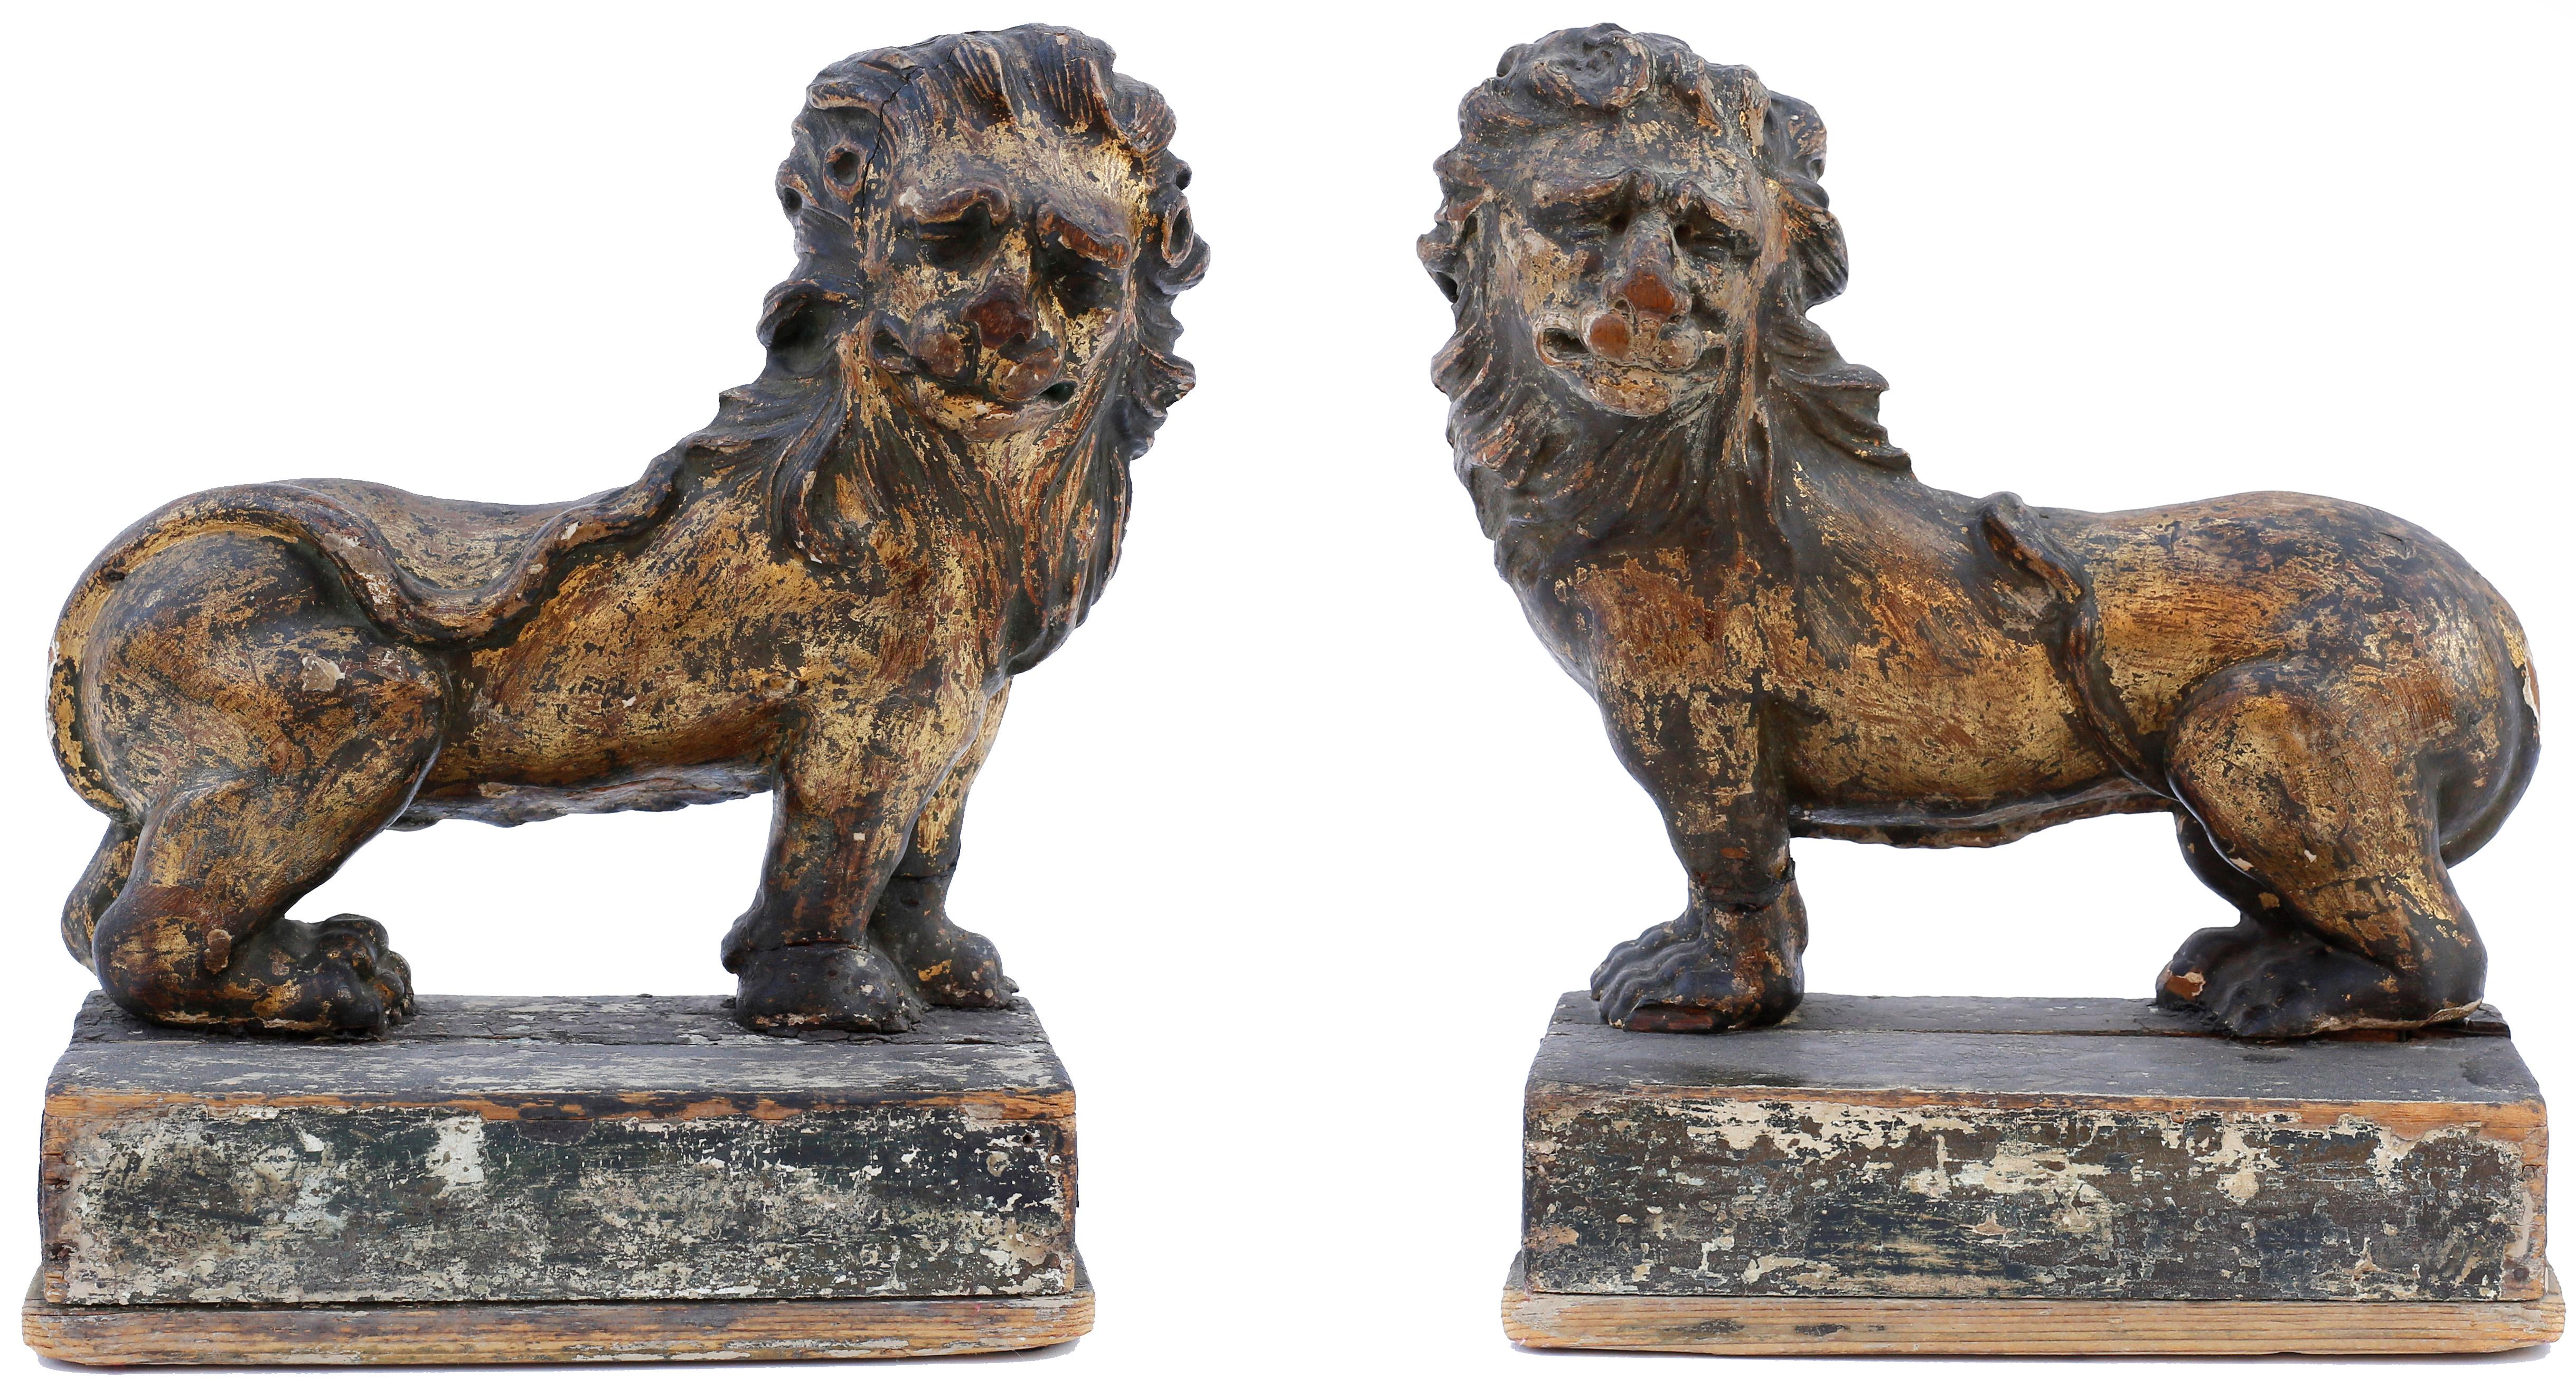 A magnificent pair of giltwood lions. The two animals call to mind England's Coronation chair, commissioned by King Edward I to contain the Stone of Scone brought to Westminster Abbey in 1296. Constructed four years later, the chair has been in use